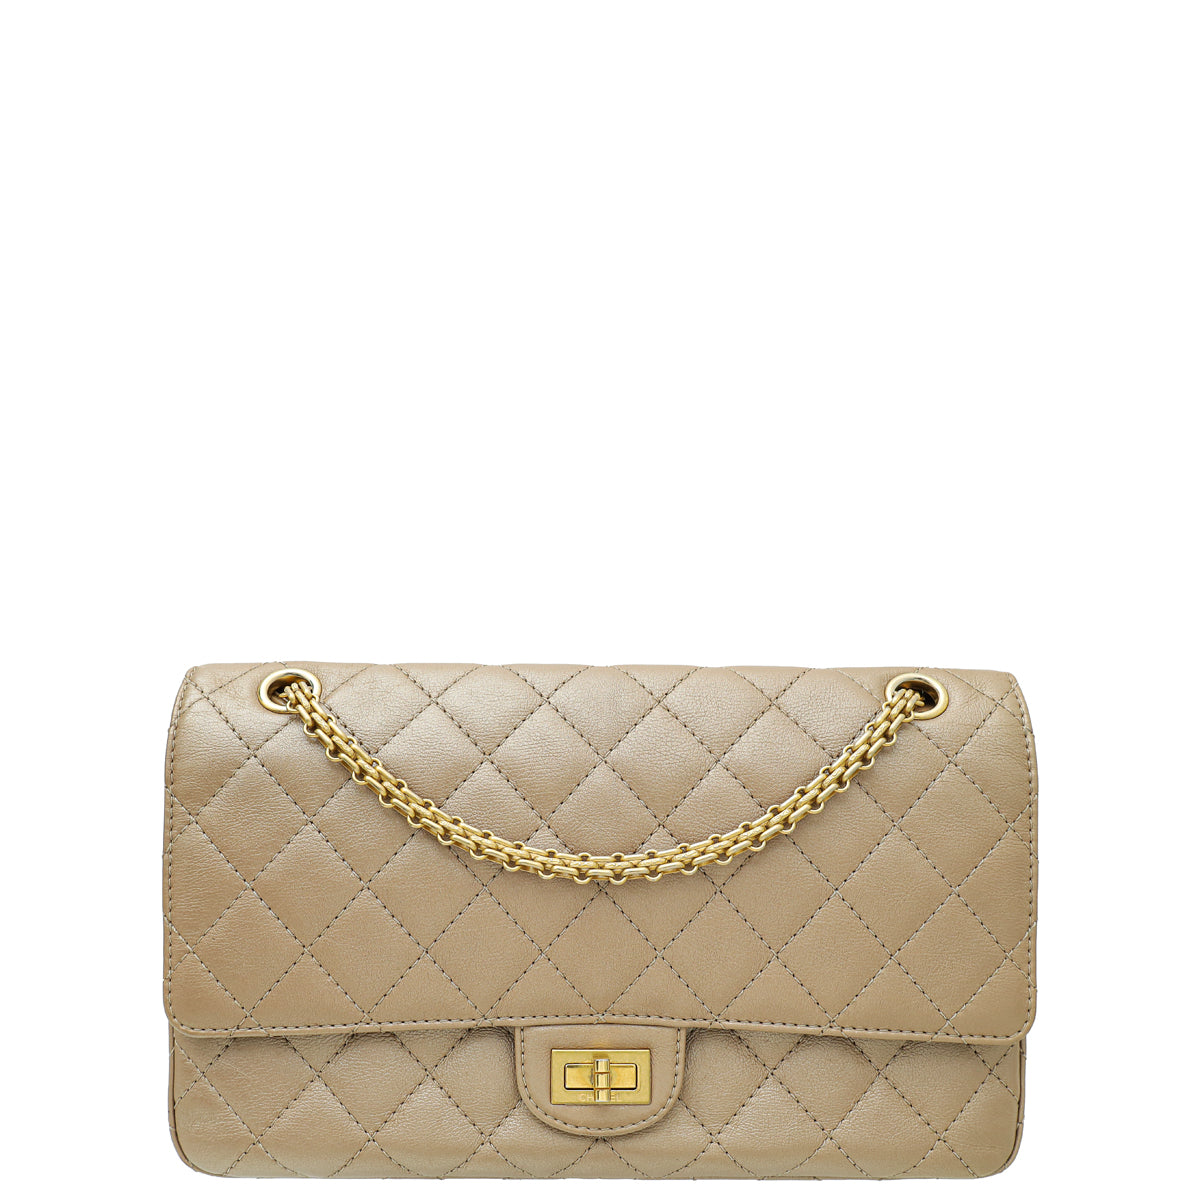 Chanel Metallic Brownish Champagne 2.55 Reissue 226 Double Flap Bag